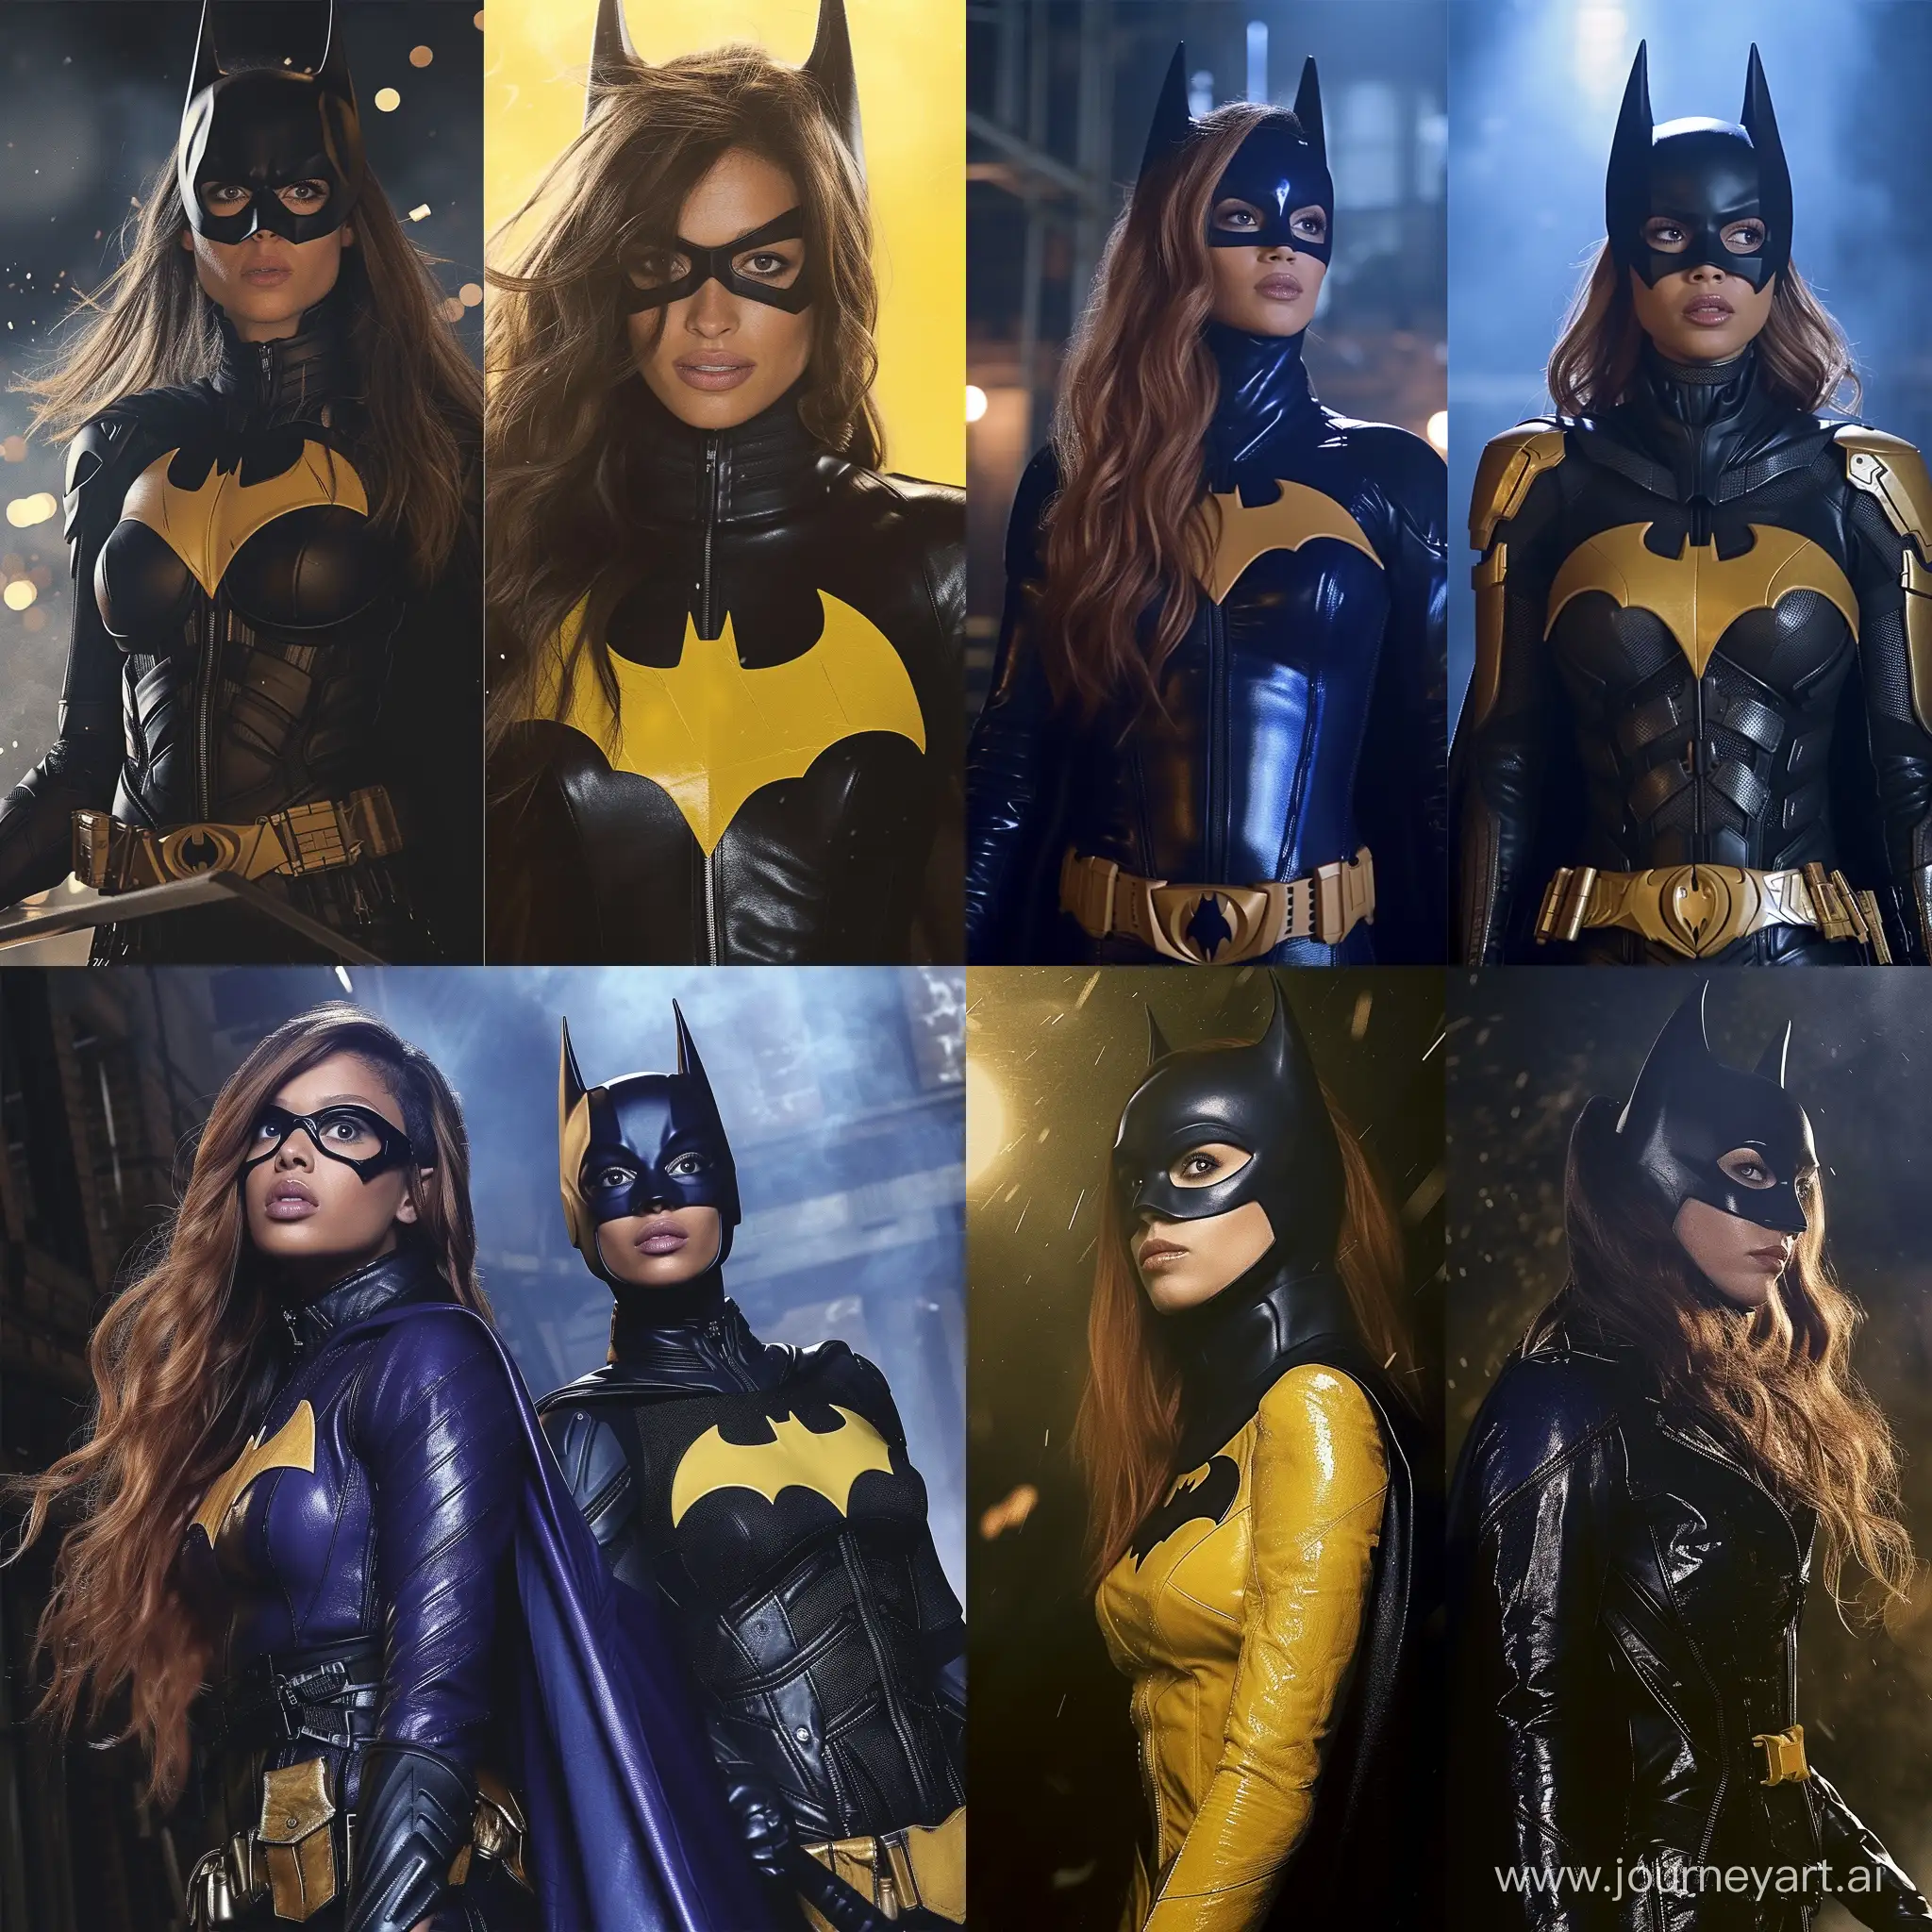 Ashley-Tisdale-and-Erica-Ash-Transform-into-Dynamic-Batgirl-Duo-for-Movie